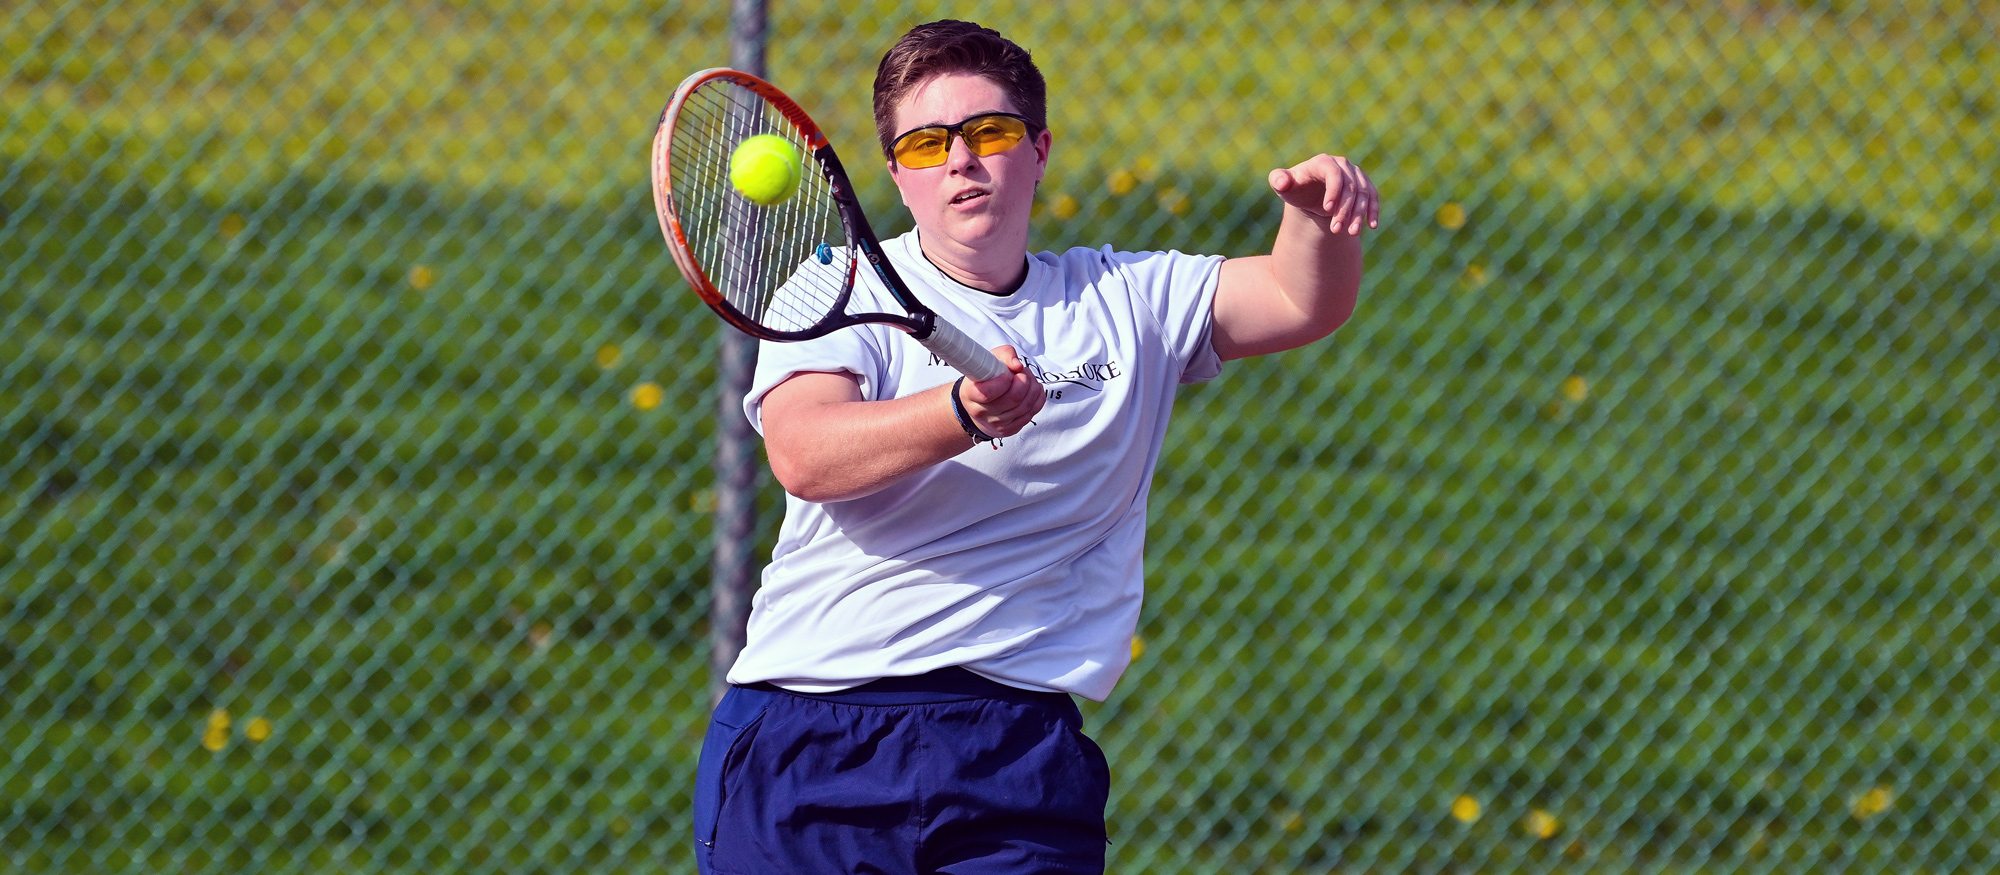 Cal Smith teamed with Rachel Allen to post a win in the C Draw of the 2023 New England Intercollegiate Women's Tennis Tournament. (RJB Sports file photo)